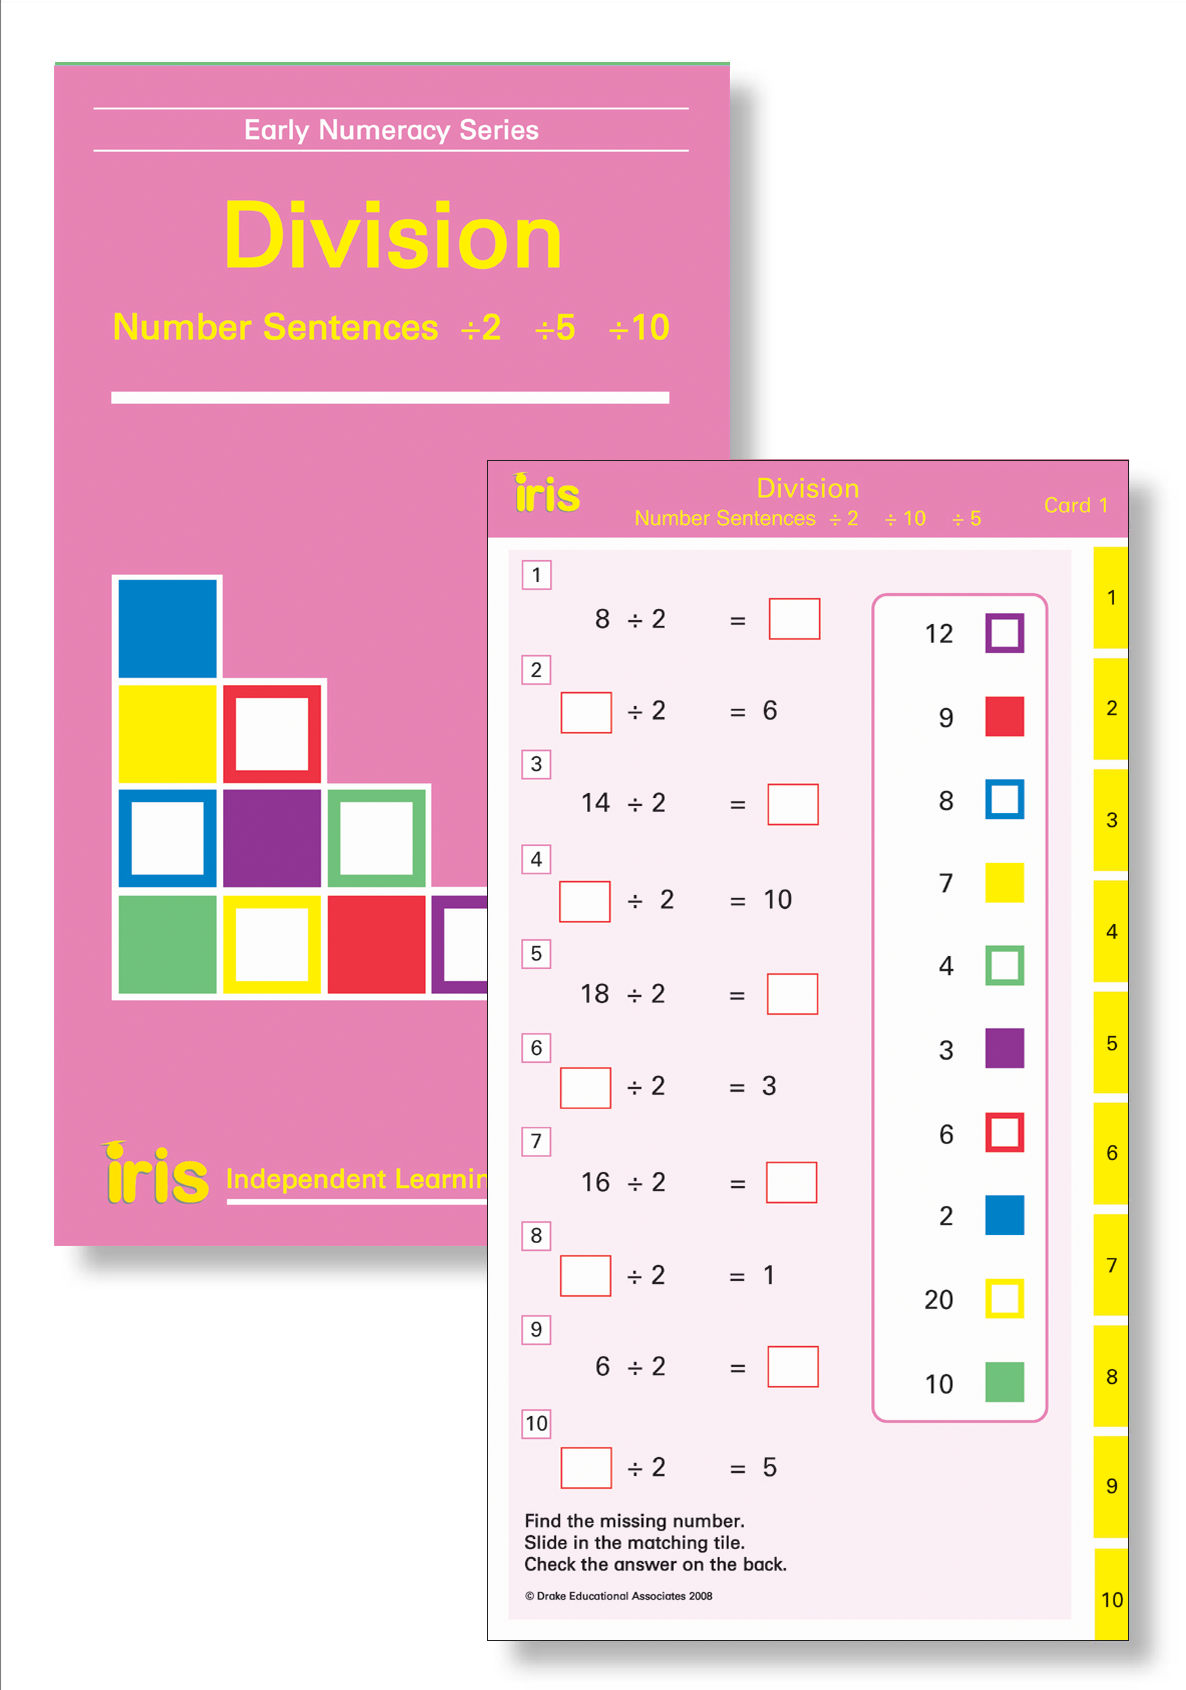 Iris Study Cards: Early Numeracy Year 2 - Division